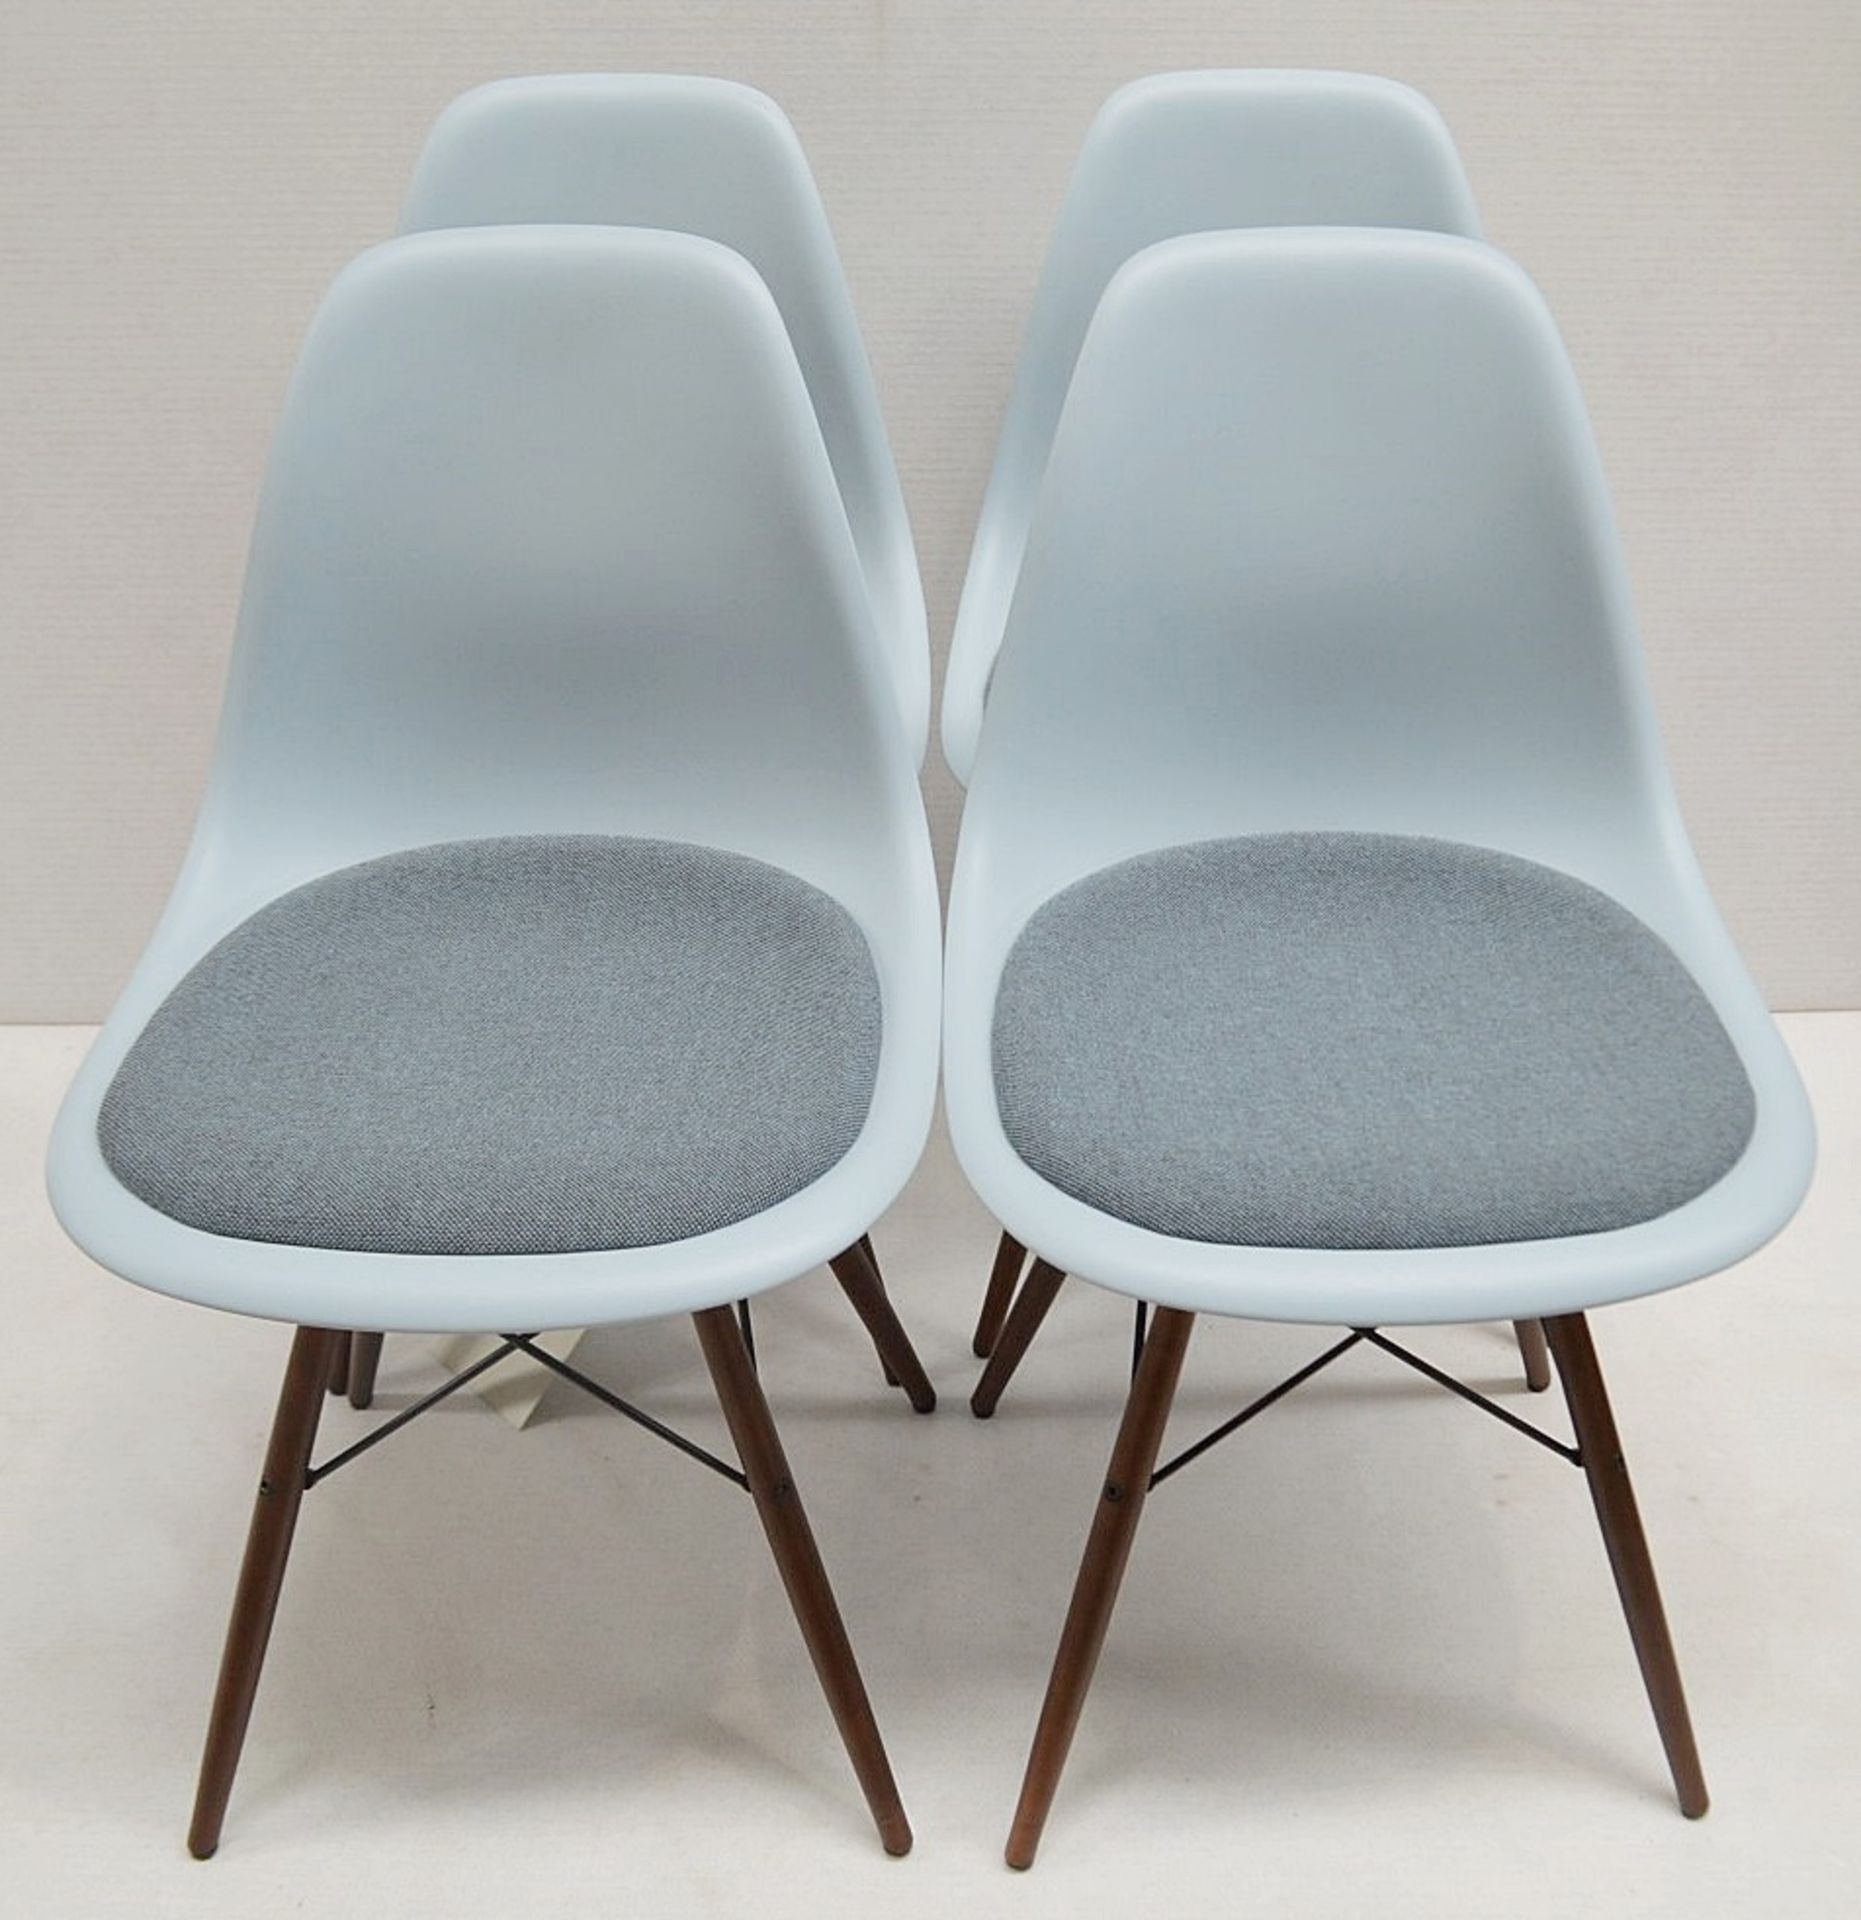 Set Of 4 x VITRA Eames DSW Designer Side Chairs With Upholsted Seats And Maple Bases In A Dark Stain